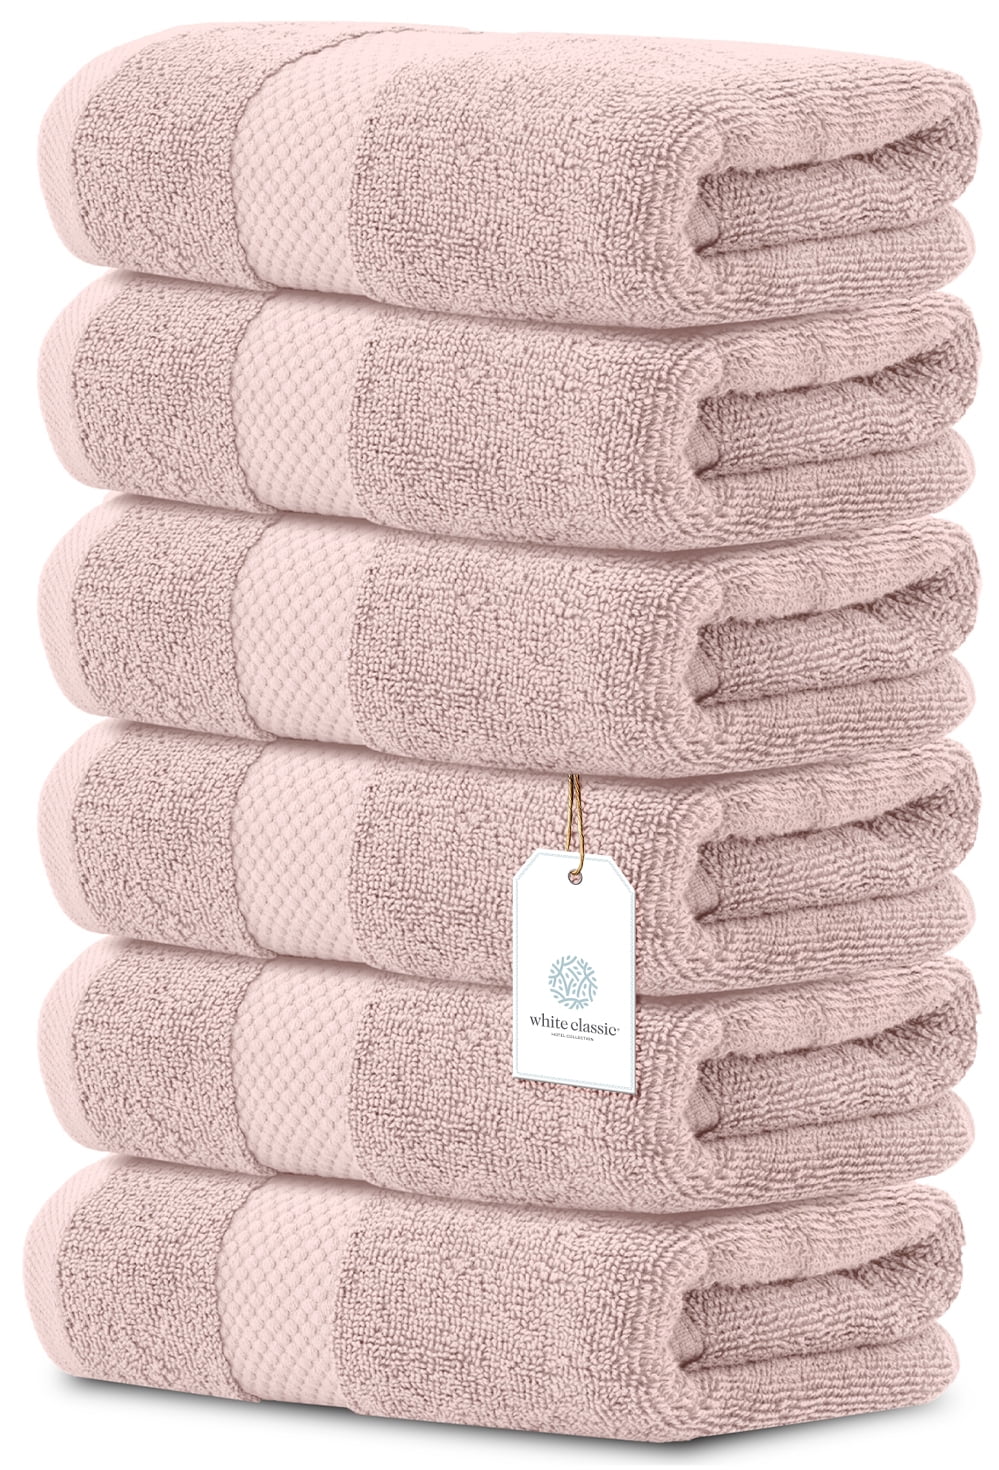  PiccoCasa Set of 2, 750 GSM Luxury White Hand Towels -  Oversized 16x30 Inch Cotton Ring Spun Face Towels Highly Absorbent Home  Hotel Spa Quality Towel, Champagne Strip : Home & Kitchen